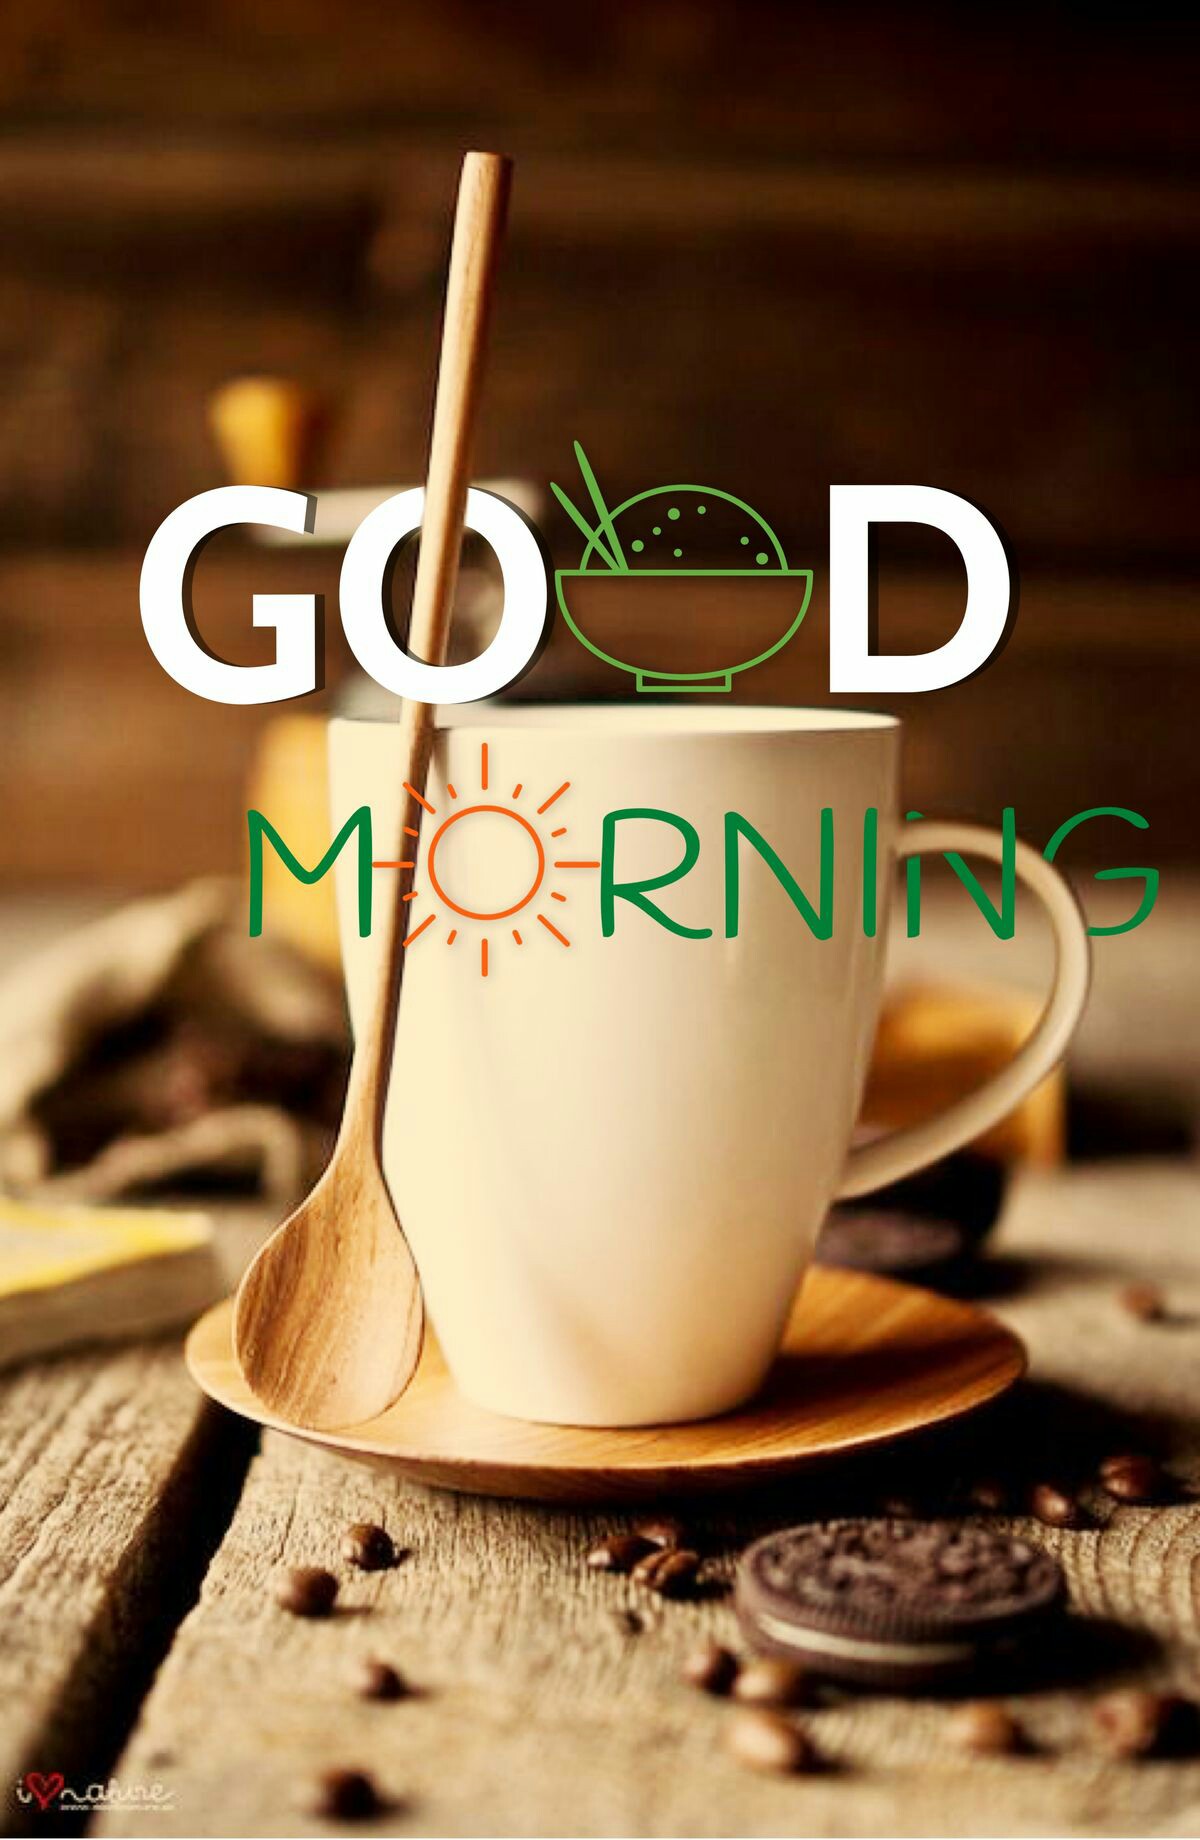 100+ Good Morning Quotes For WhatsApp